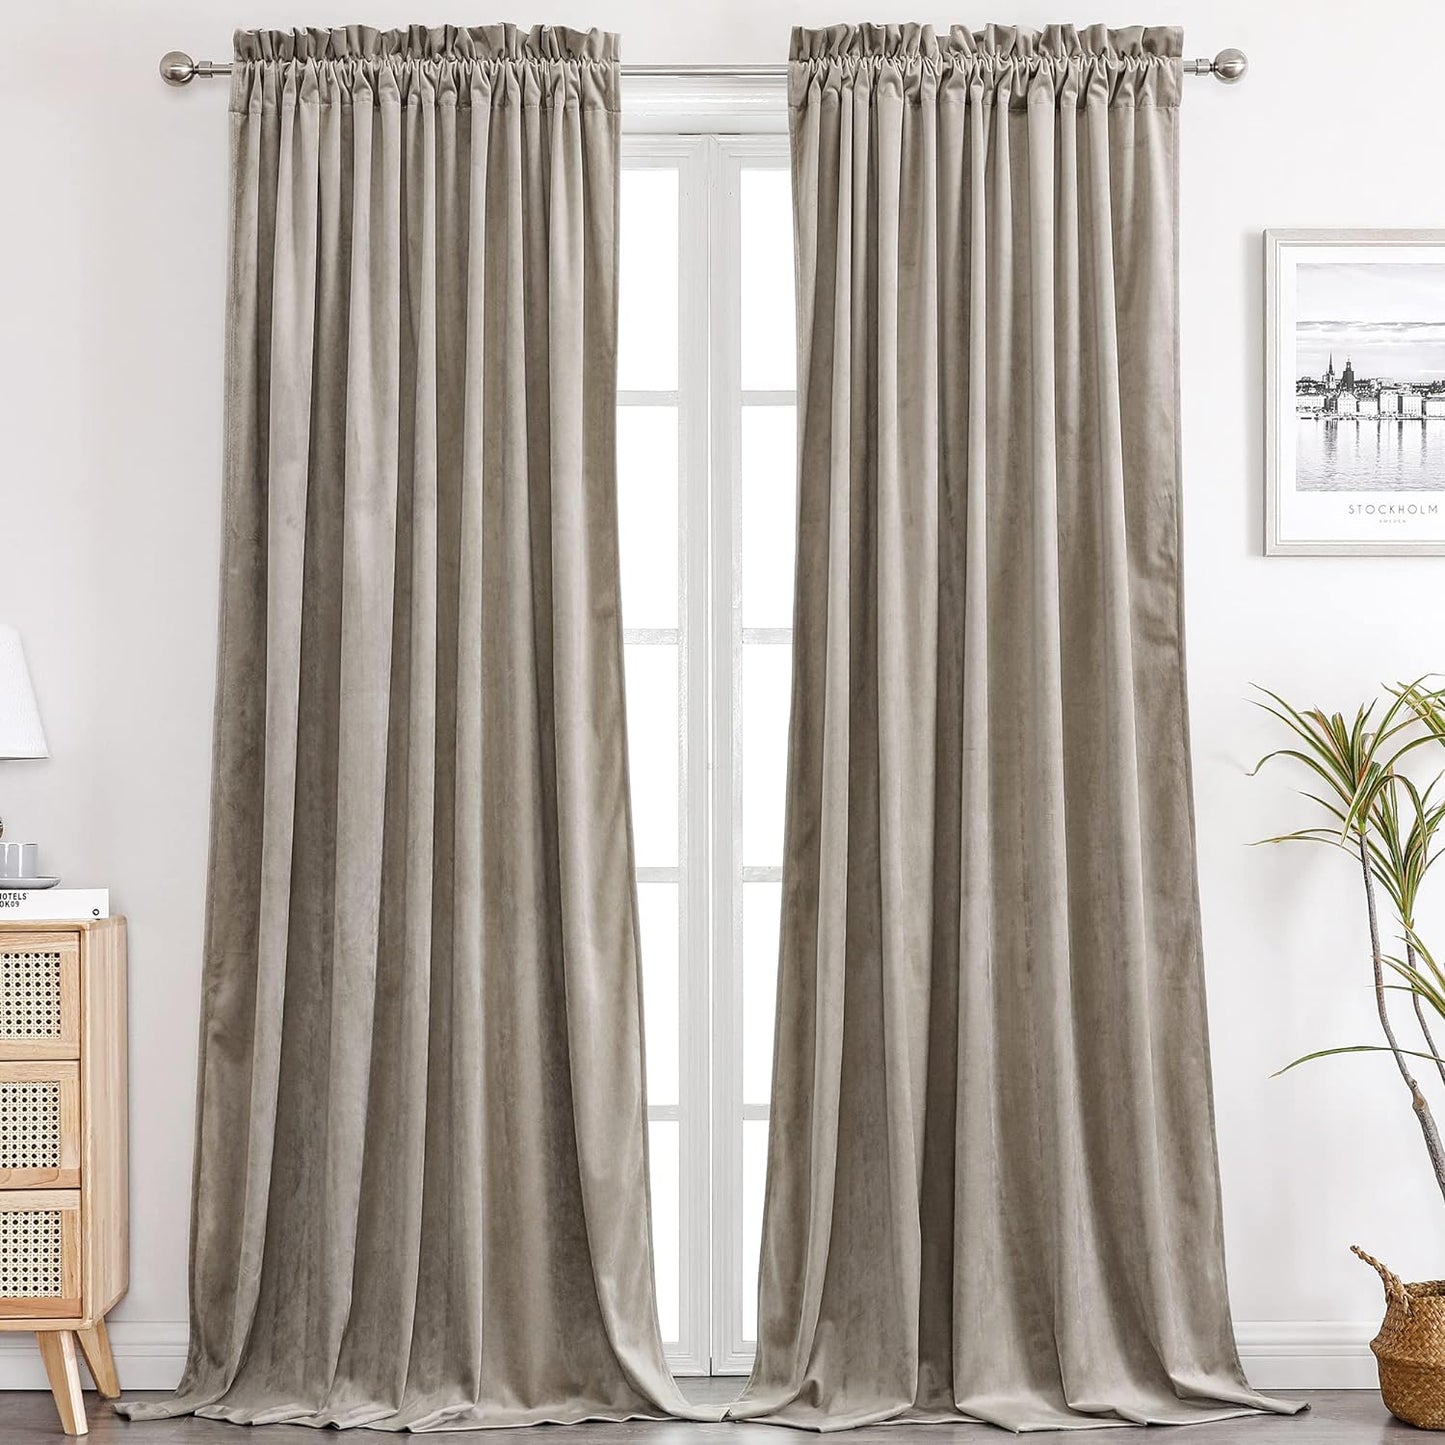 Benedeco Green Velvet Curtains for Bedroom Window, Super Soft Luxury Drapes, Room Darkening Thermal Insulated Rod Pocket Curtain for Living Room, W52 by L84 Inches, 2 Panels  Benedeco Taupe W52 * L120 | 2 Panels 